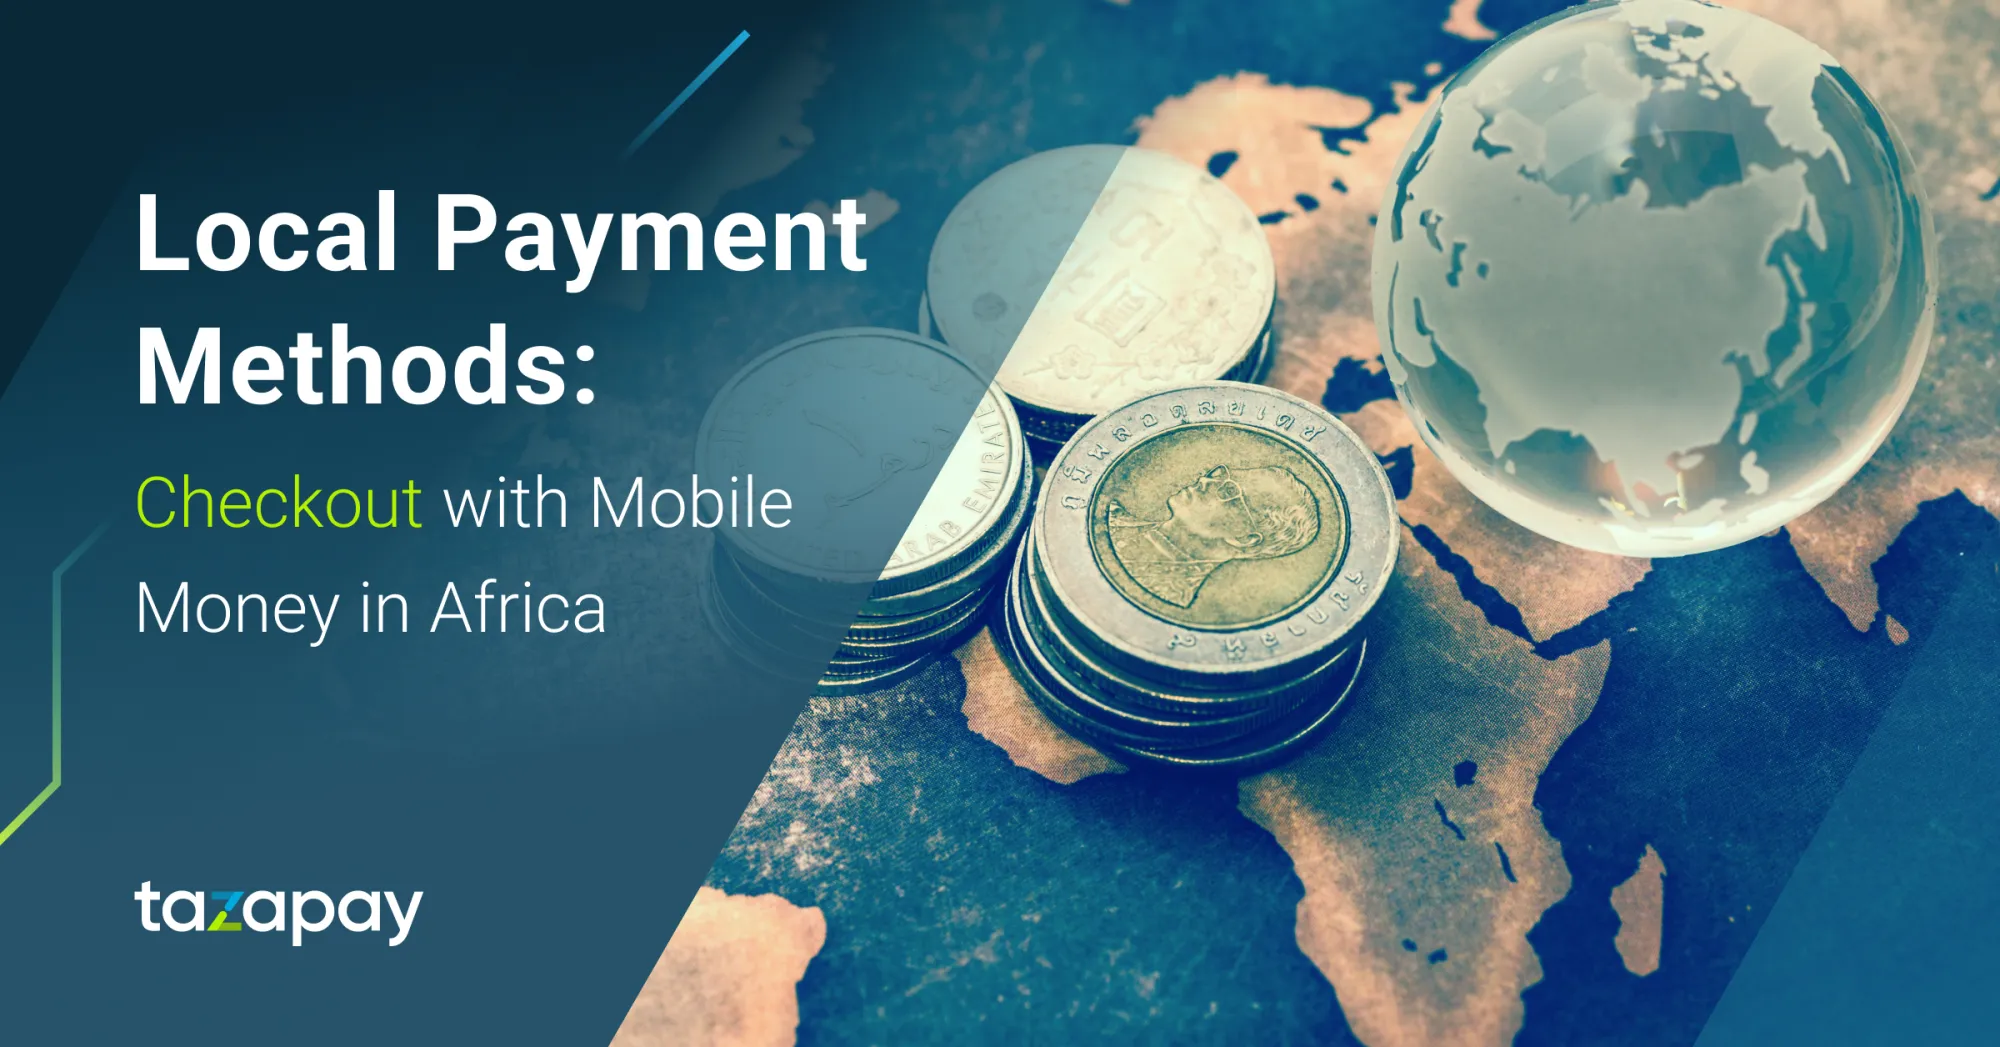 Local Payment Methods: How Africa’s Mobile Money Checkout Works in an International Payment Gateway